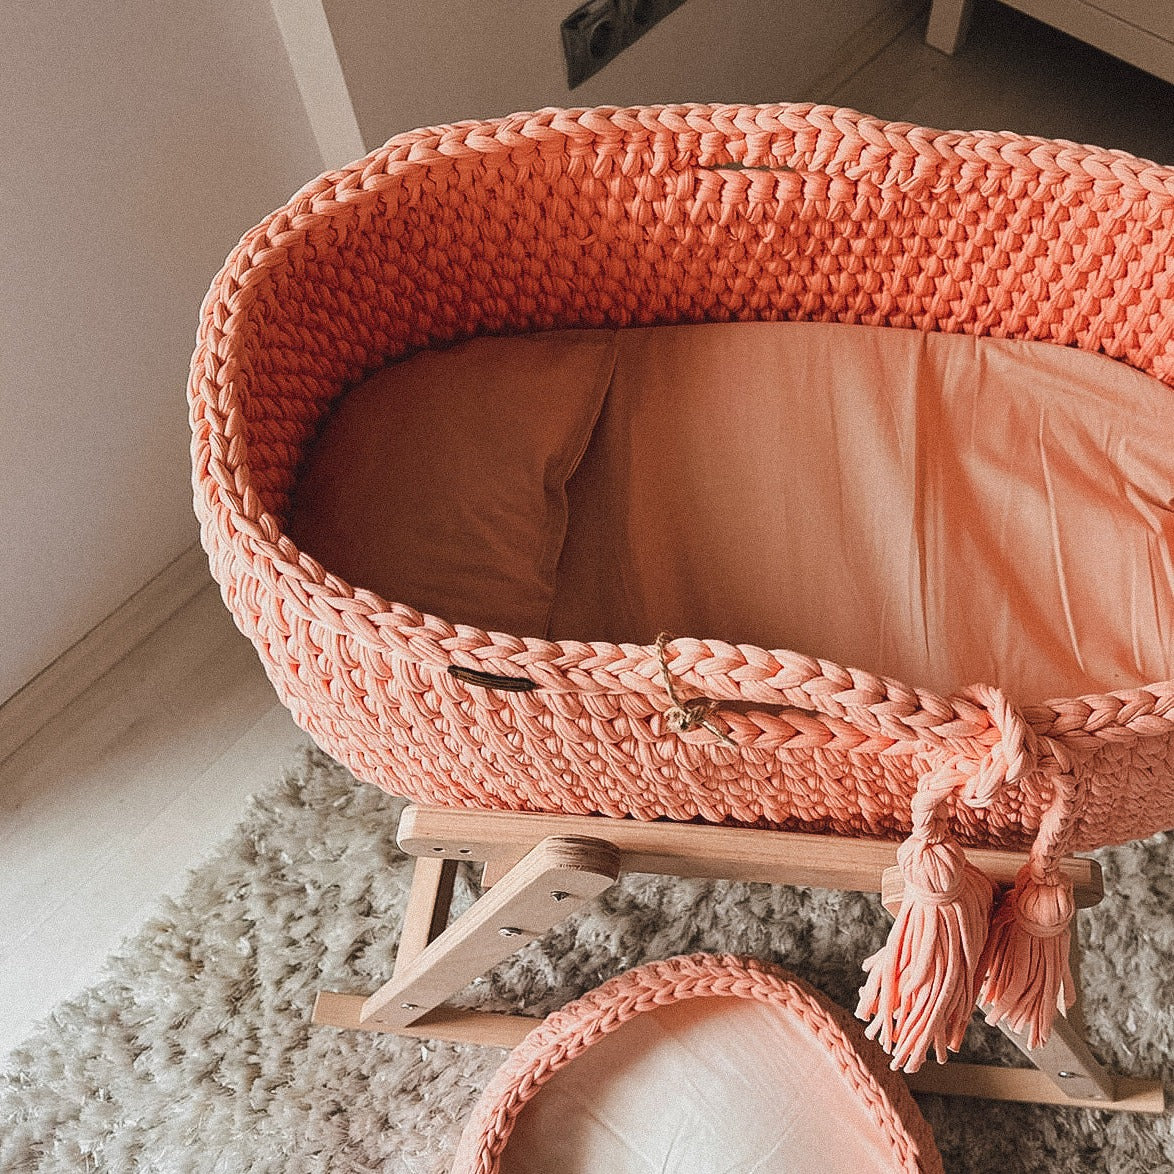 Angel Hand-Knitted Baby Bassinet - Salmon